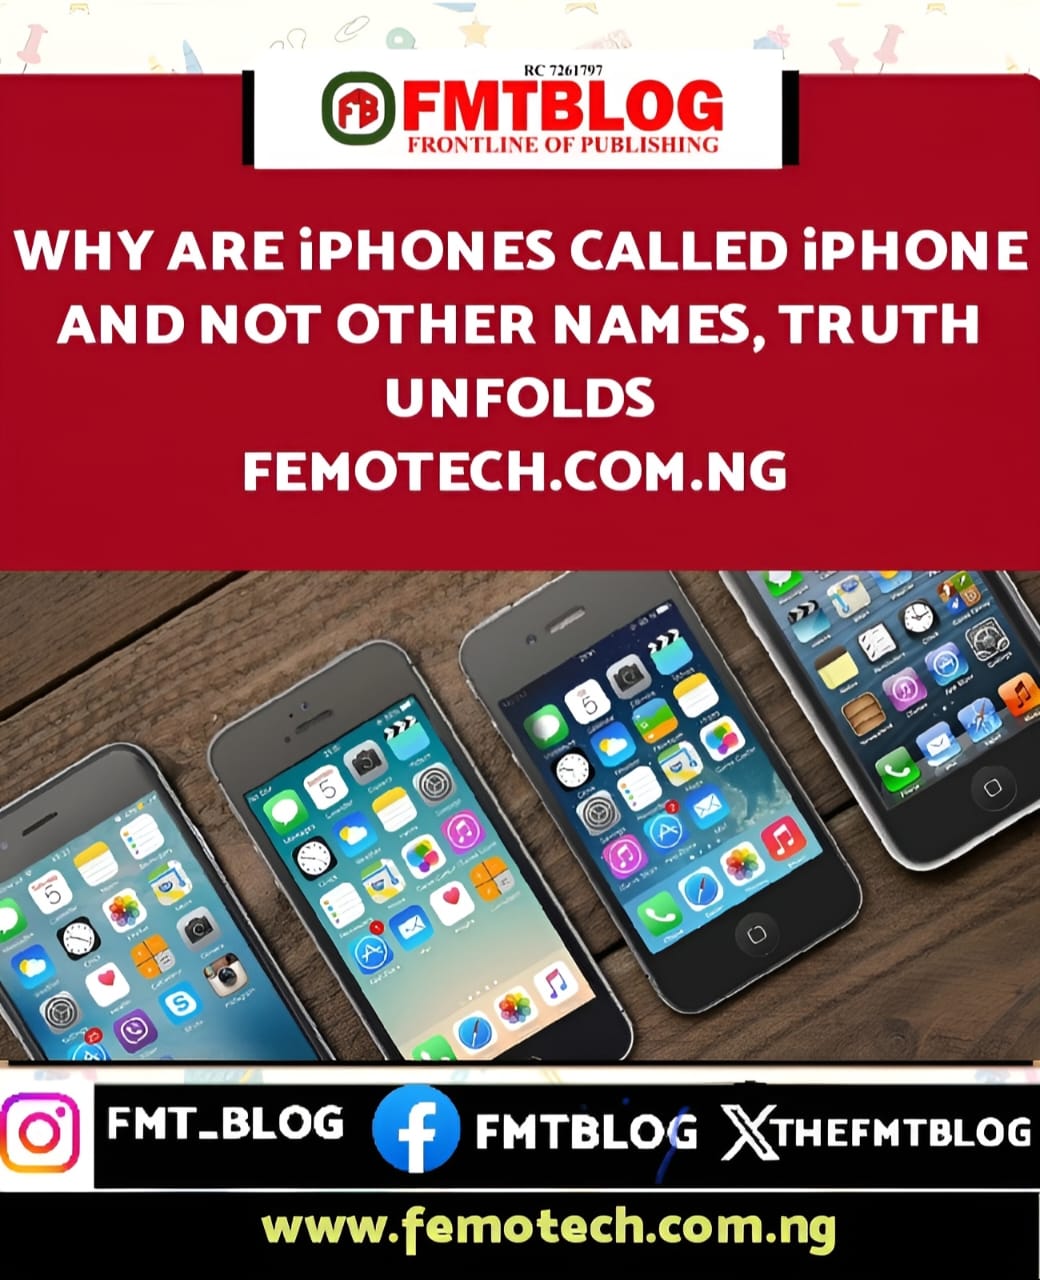 Why Are iPhones Called iPhone And Not Other Names? Truth Unfolds